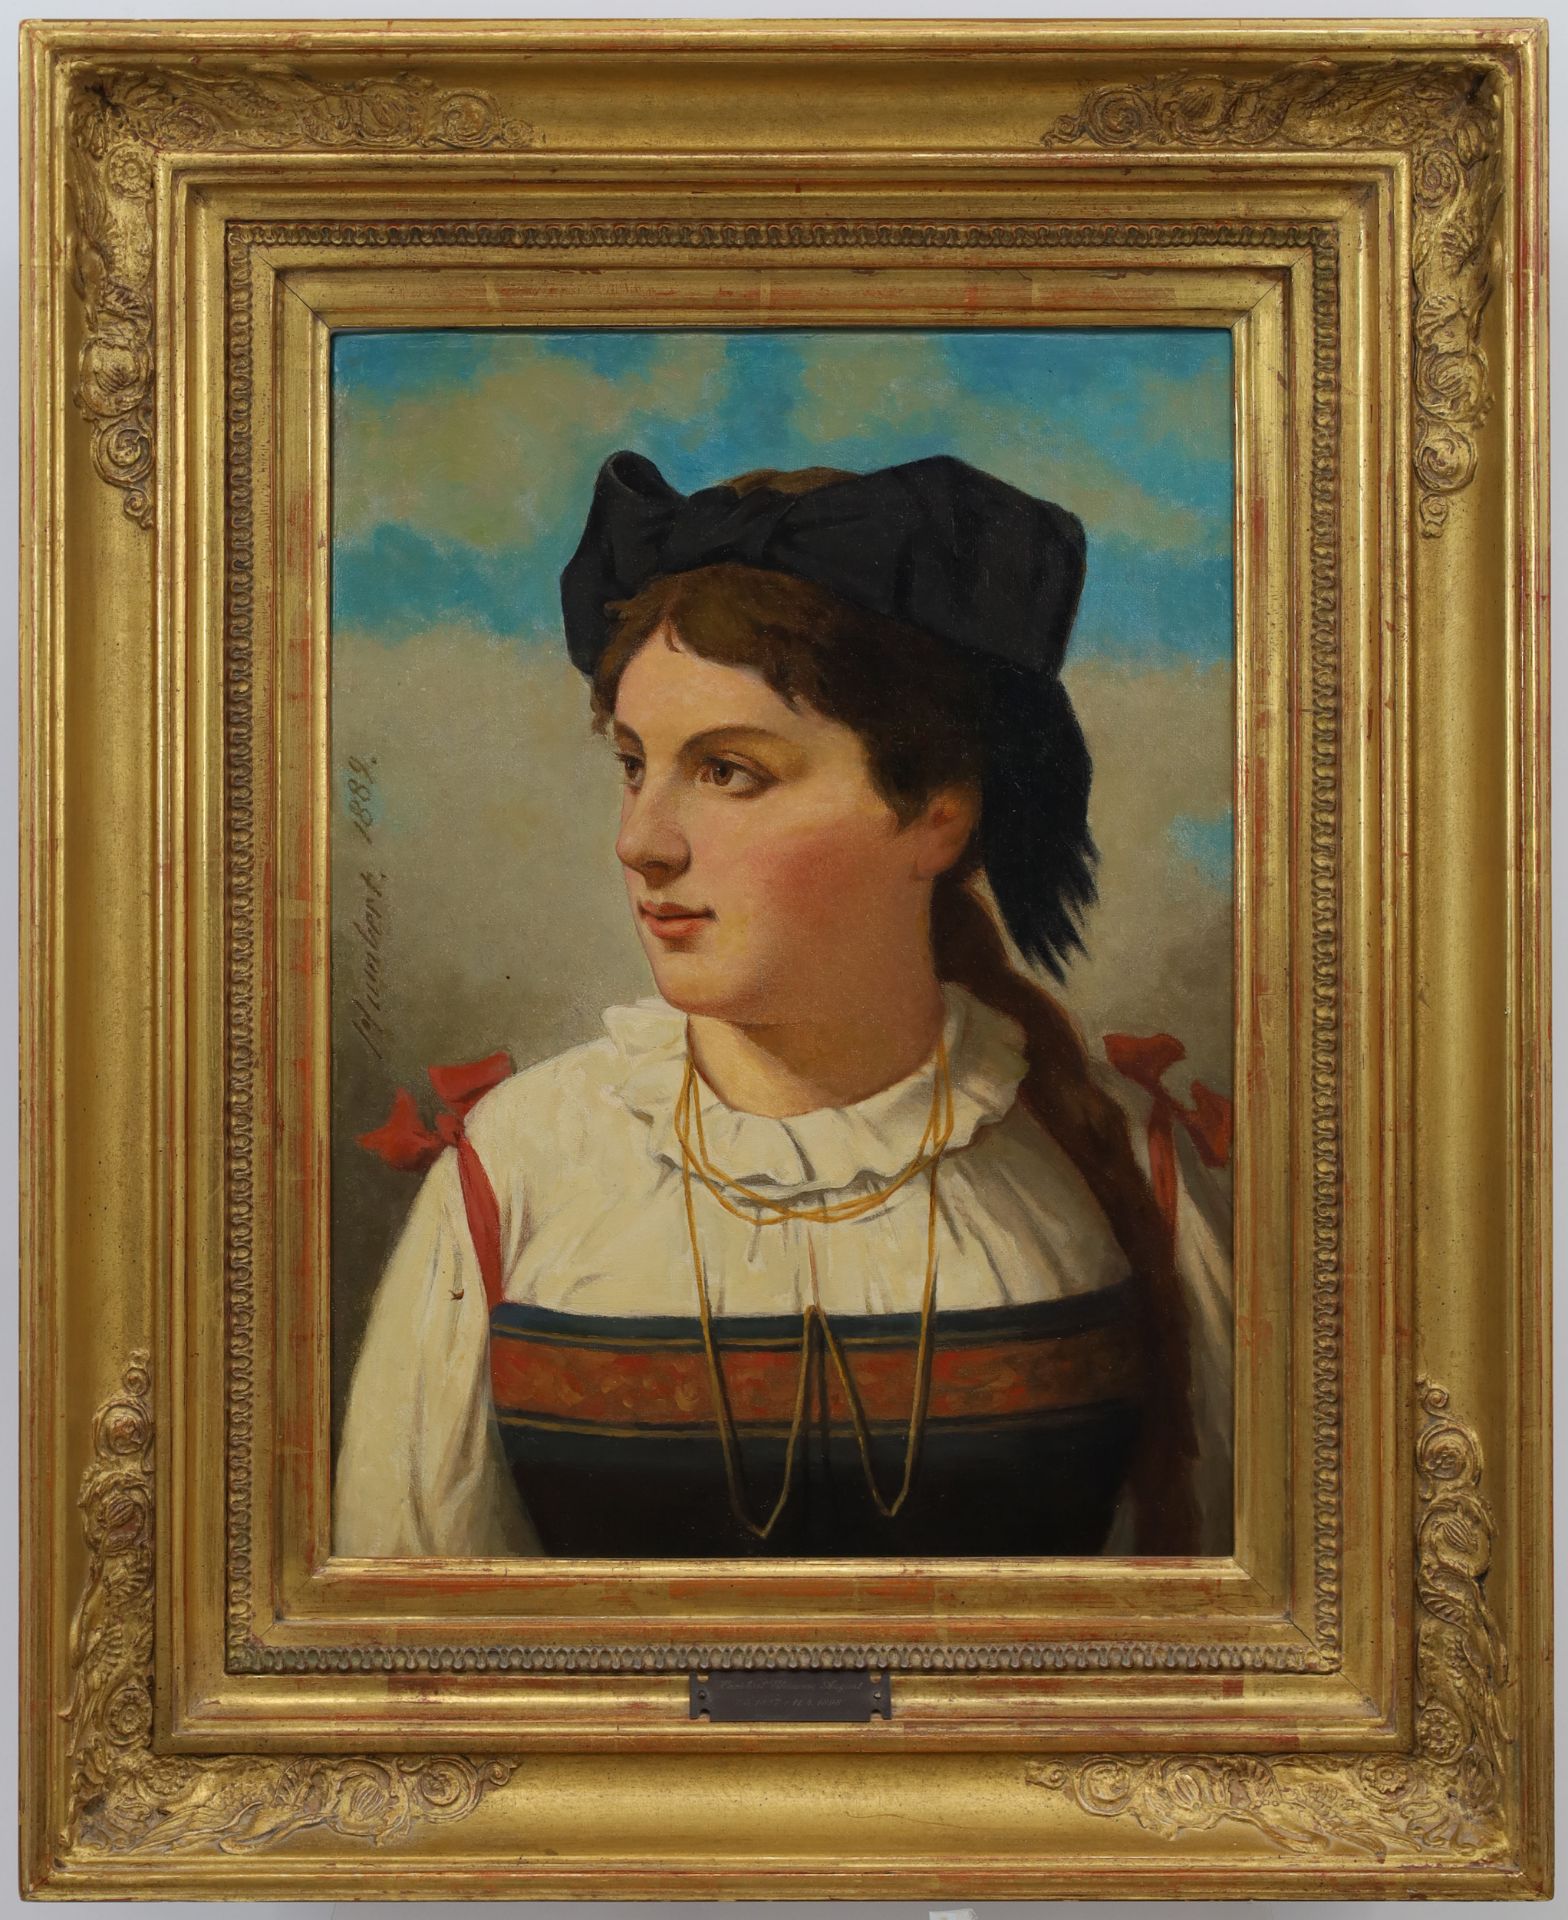 August Clemens HUMBERT (1827 - 1898). Girl in traditional costume from Baden. - Image 2 of 13